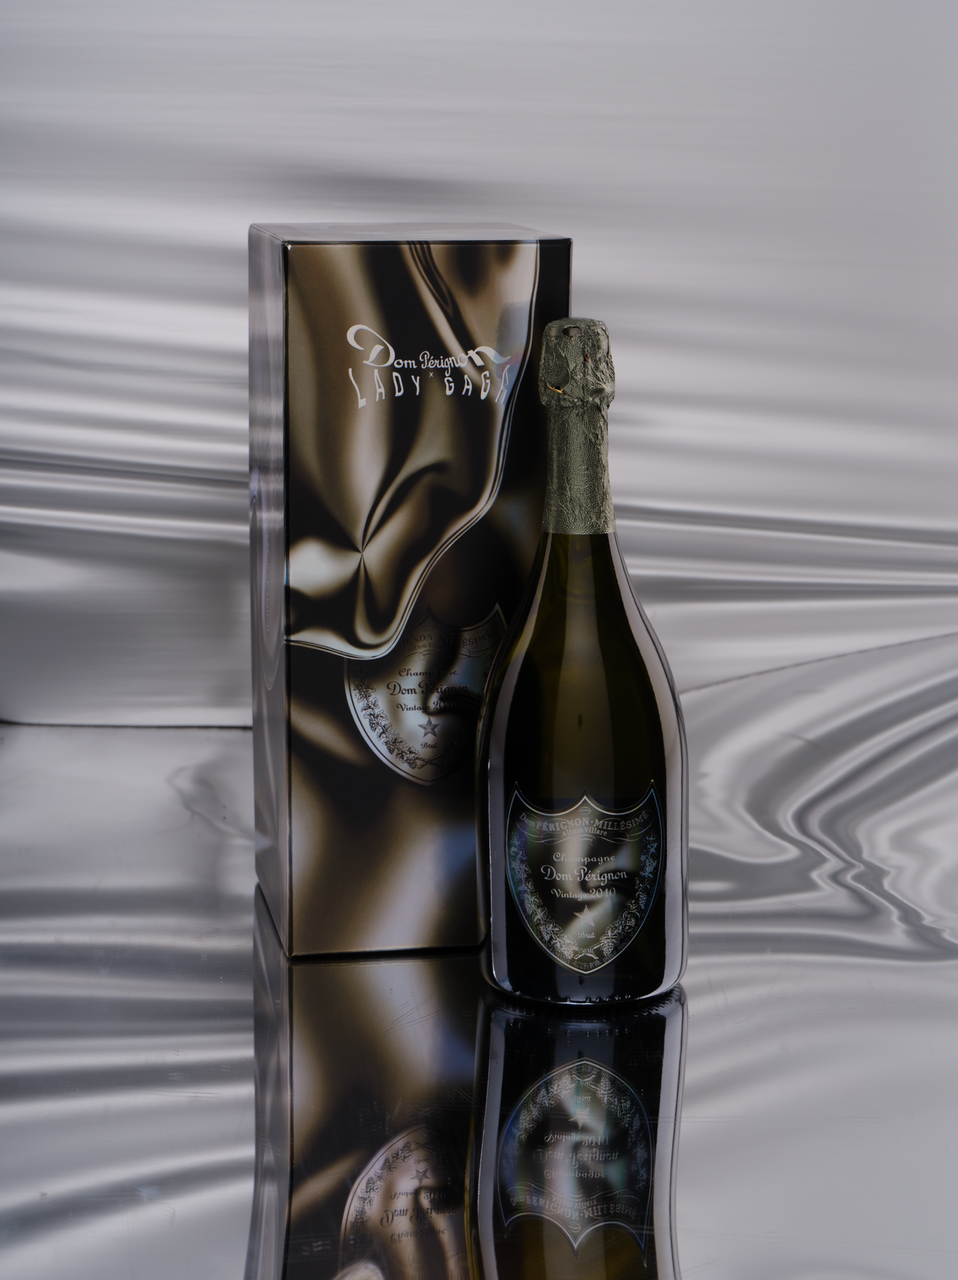 Dom Pérignon Brut Champagne 2010 Lady Gaga Edition - Large Discount Liquor  store with best selection and low prices.